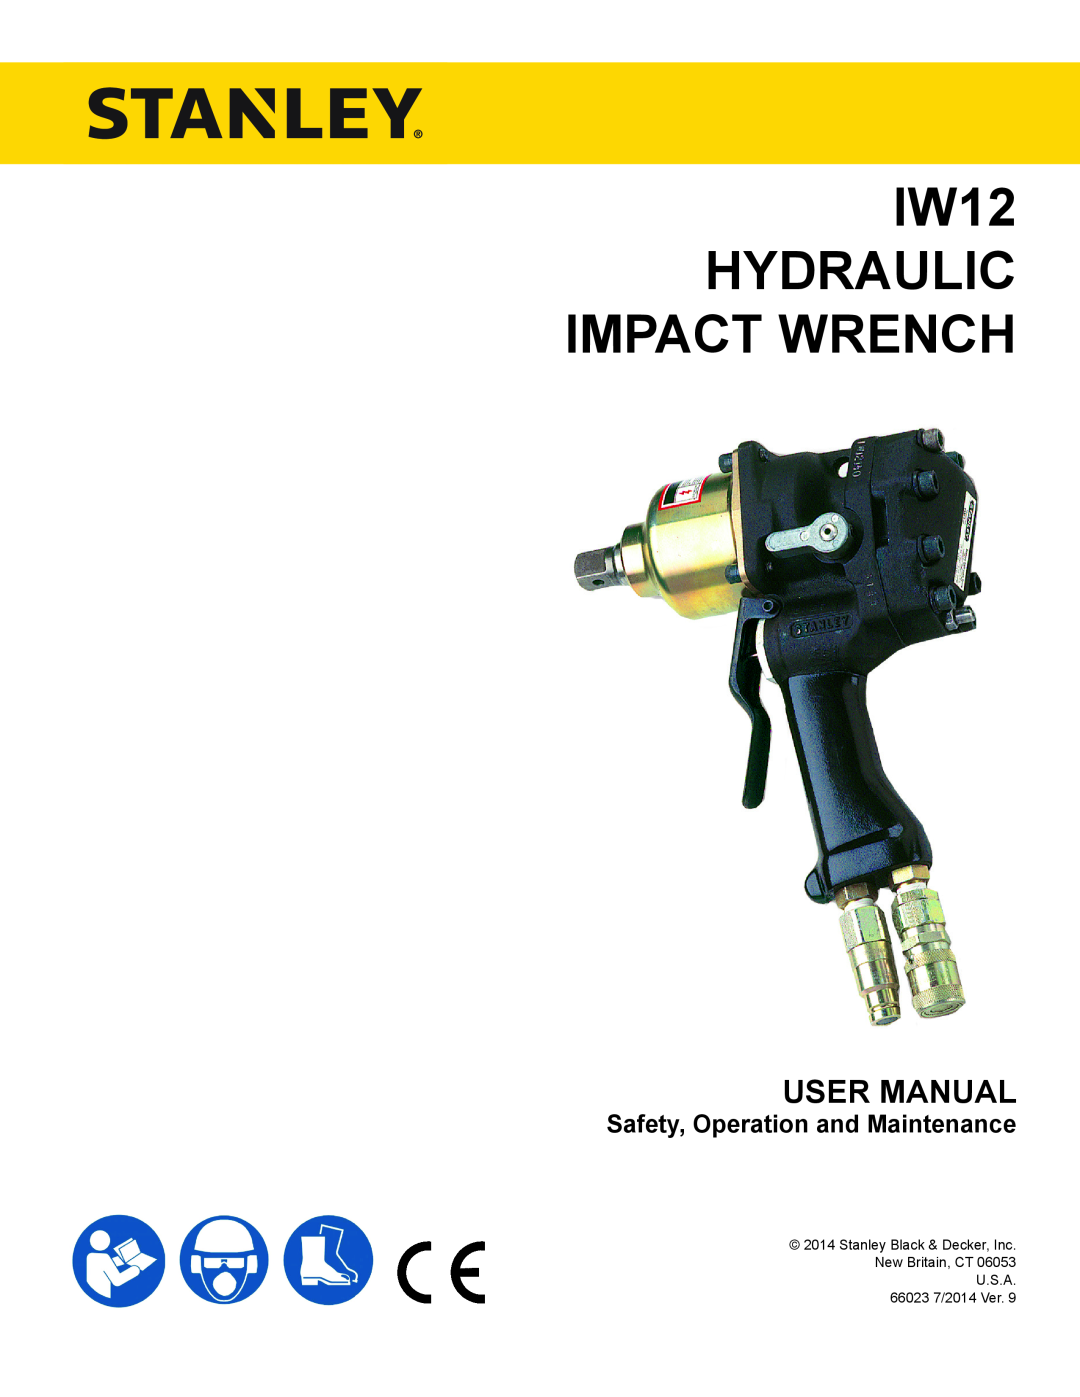 Stanley Black & Decker user manual User Manual, Safety, Operation and Maintenance, IW12 HYDRAULIC IMPACT WRENCH 